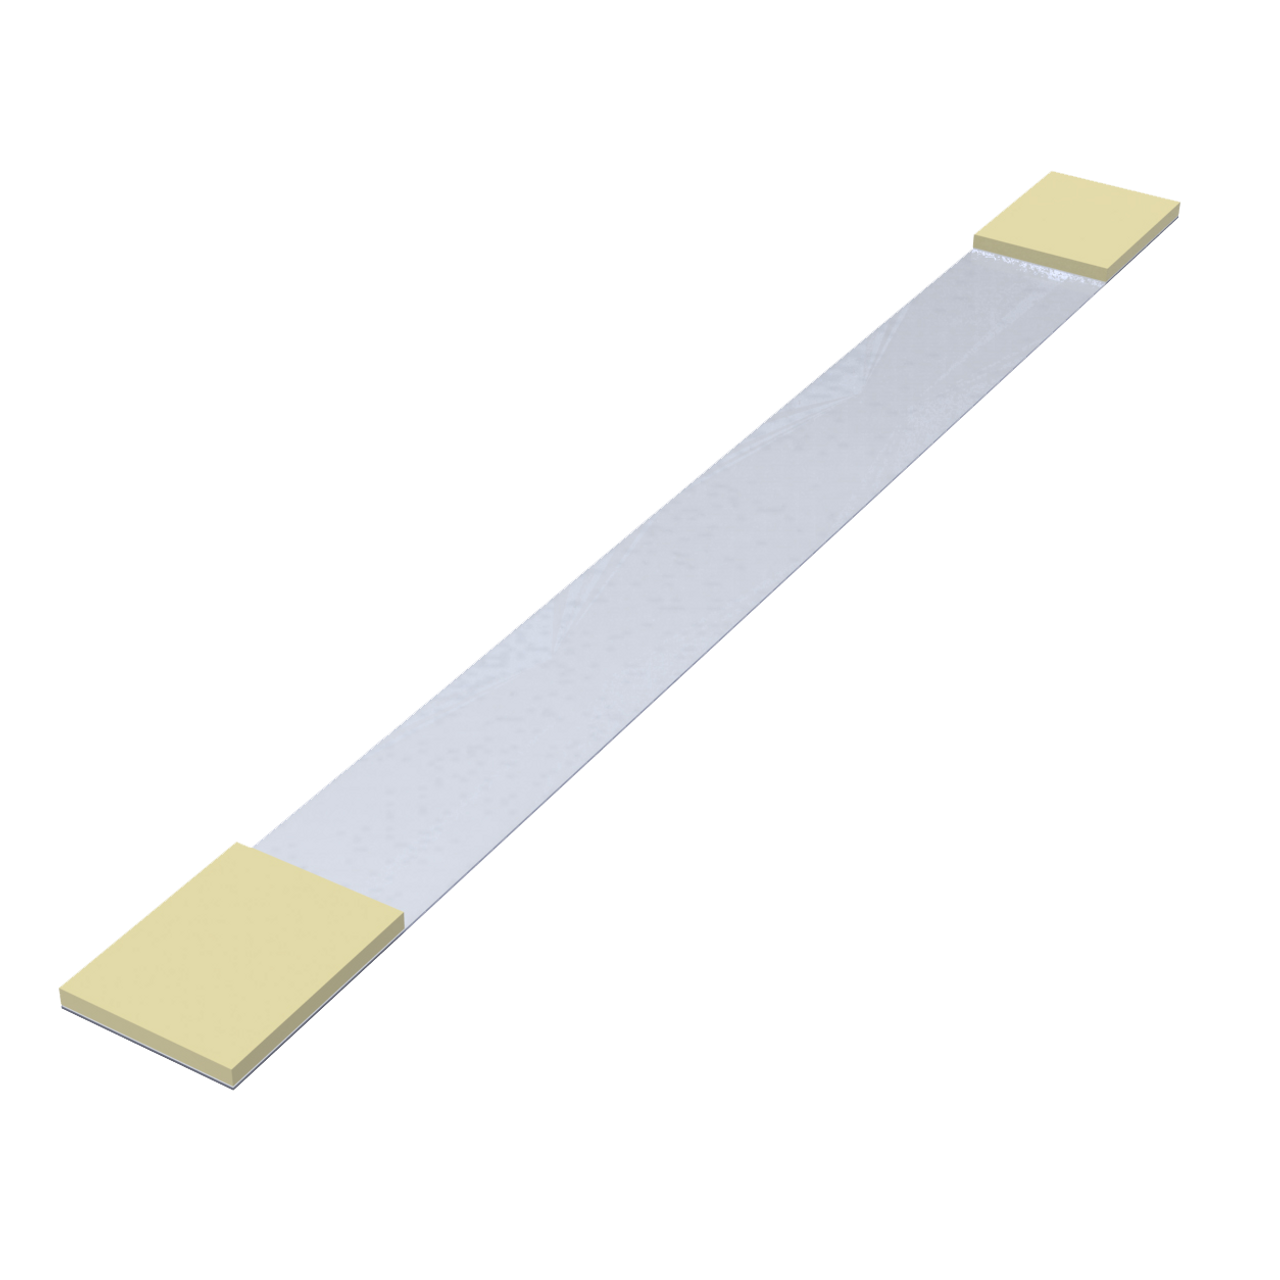 Adhesive Shelf Wobbler T-Shaped POS Strips - 150mm - Pack of 100